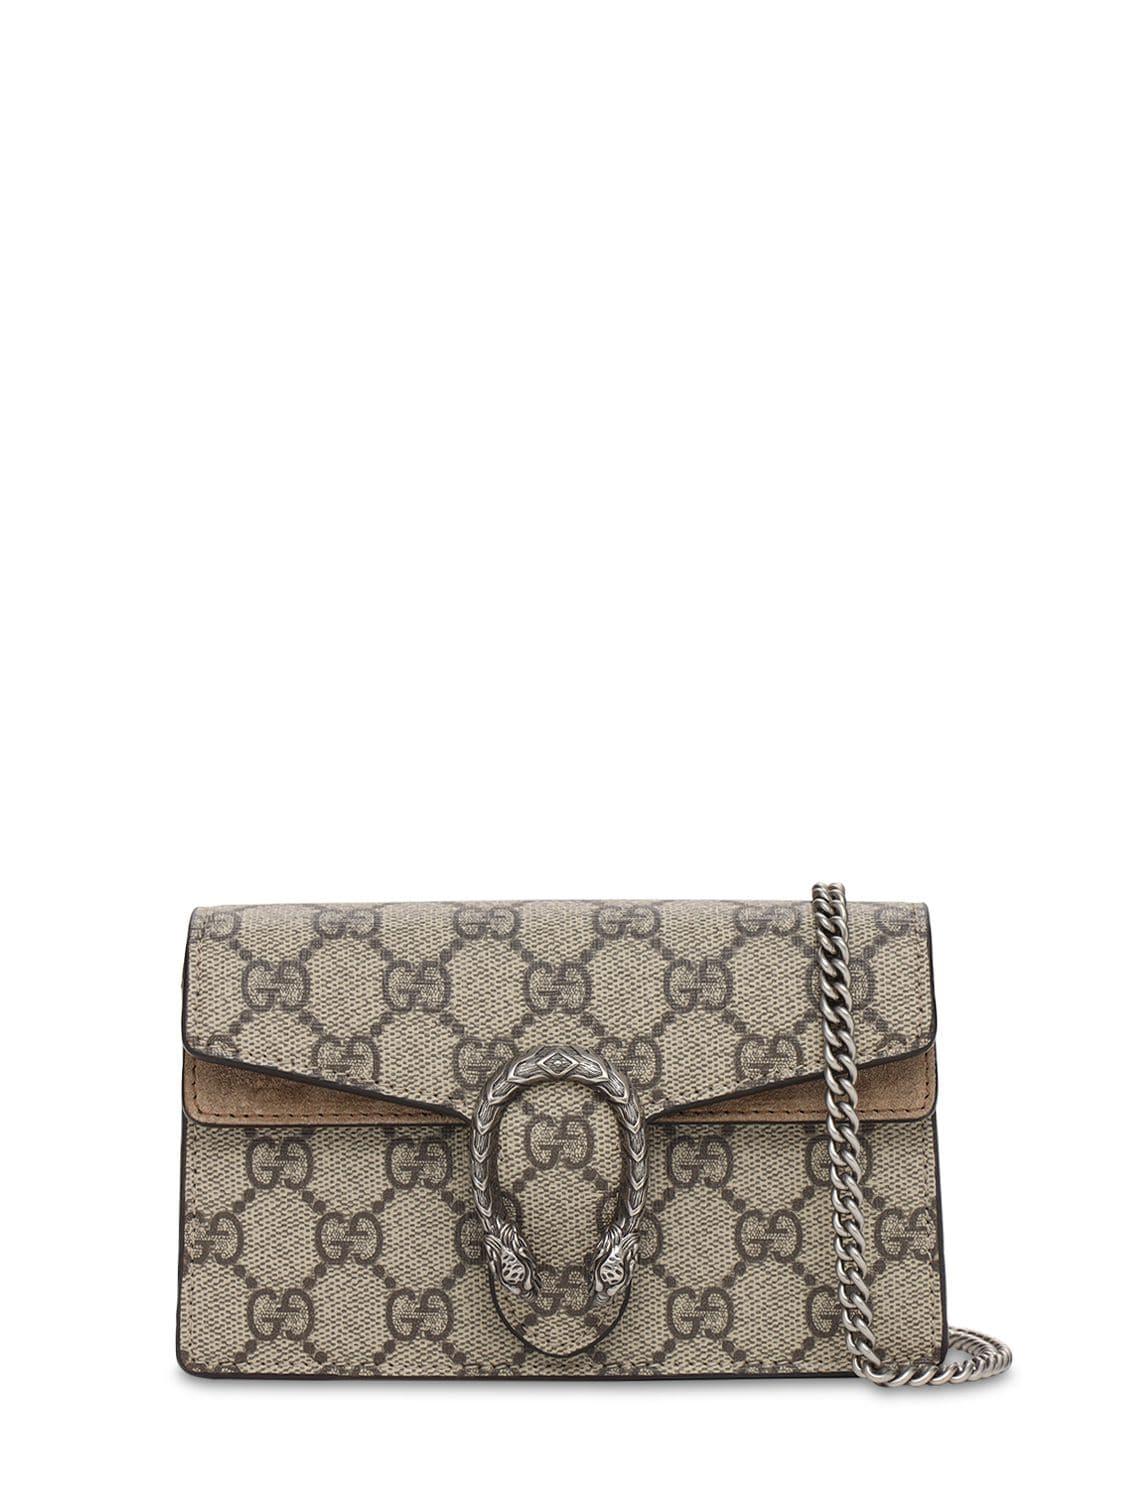 Gucci Dionysus Super Mini Printed Coated-canvas And Suede Shoulder Bag -  Save 36% - Lyst